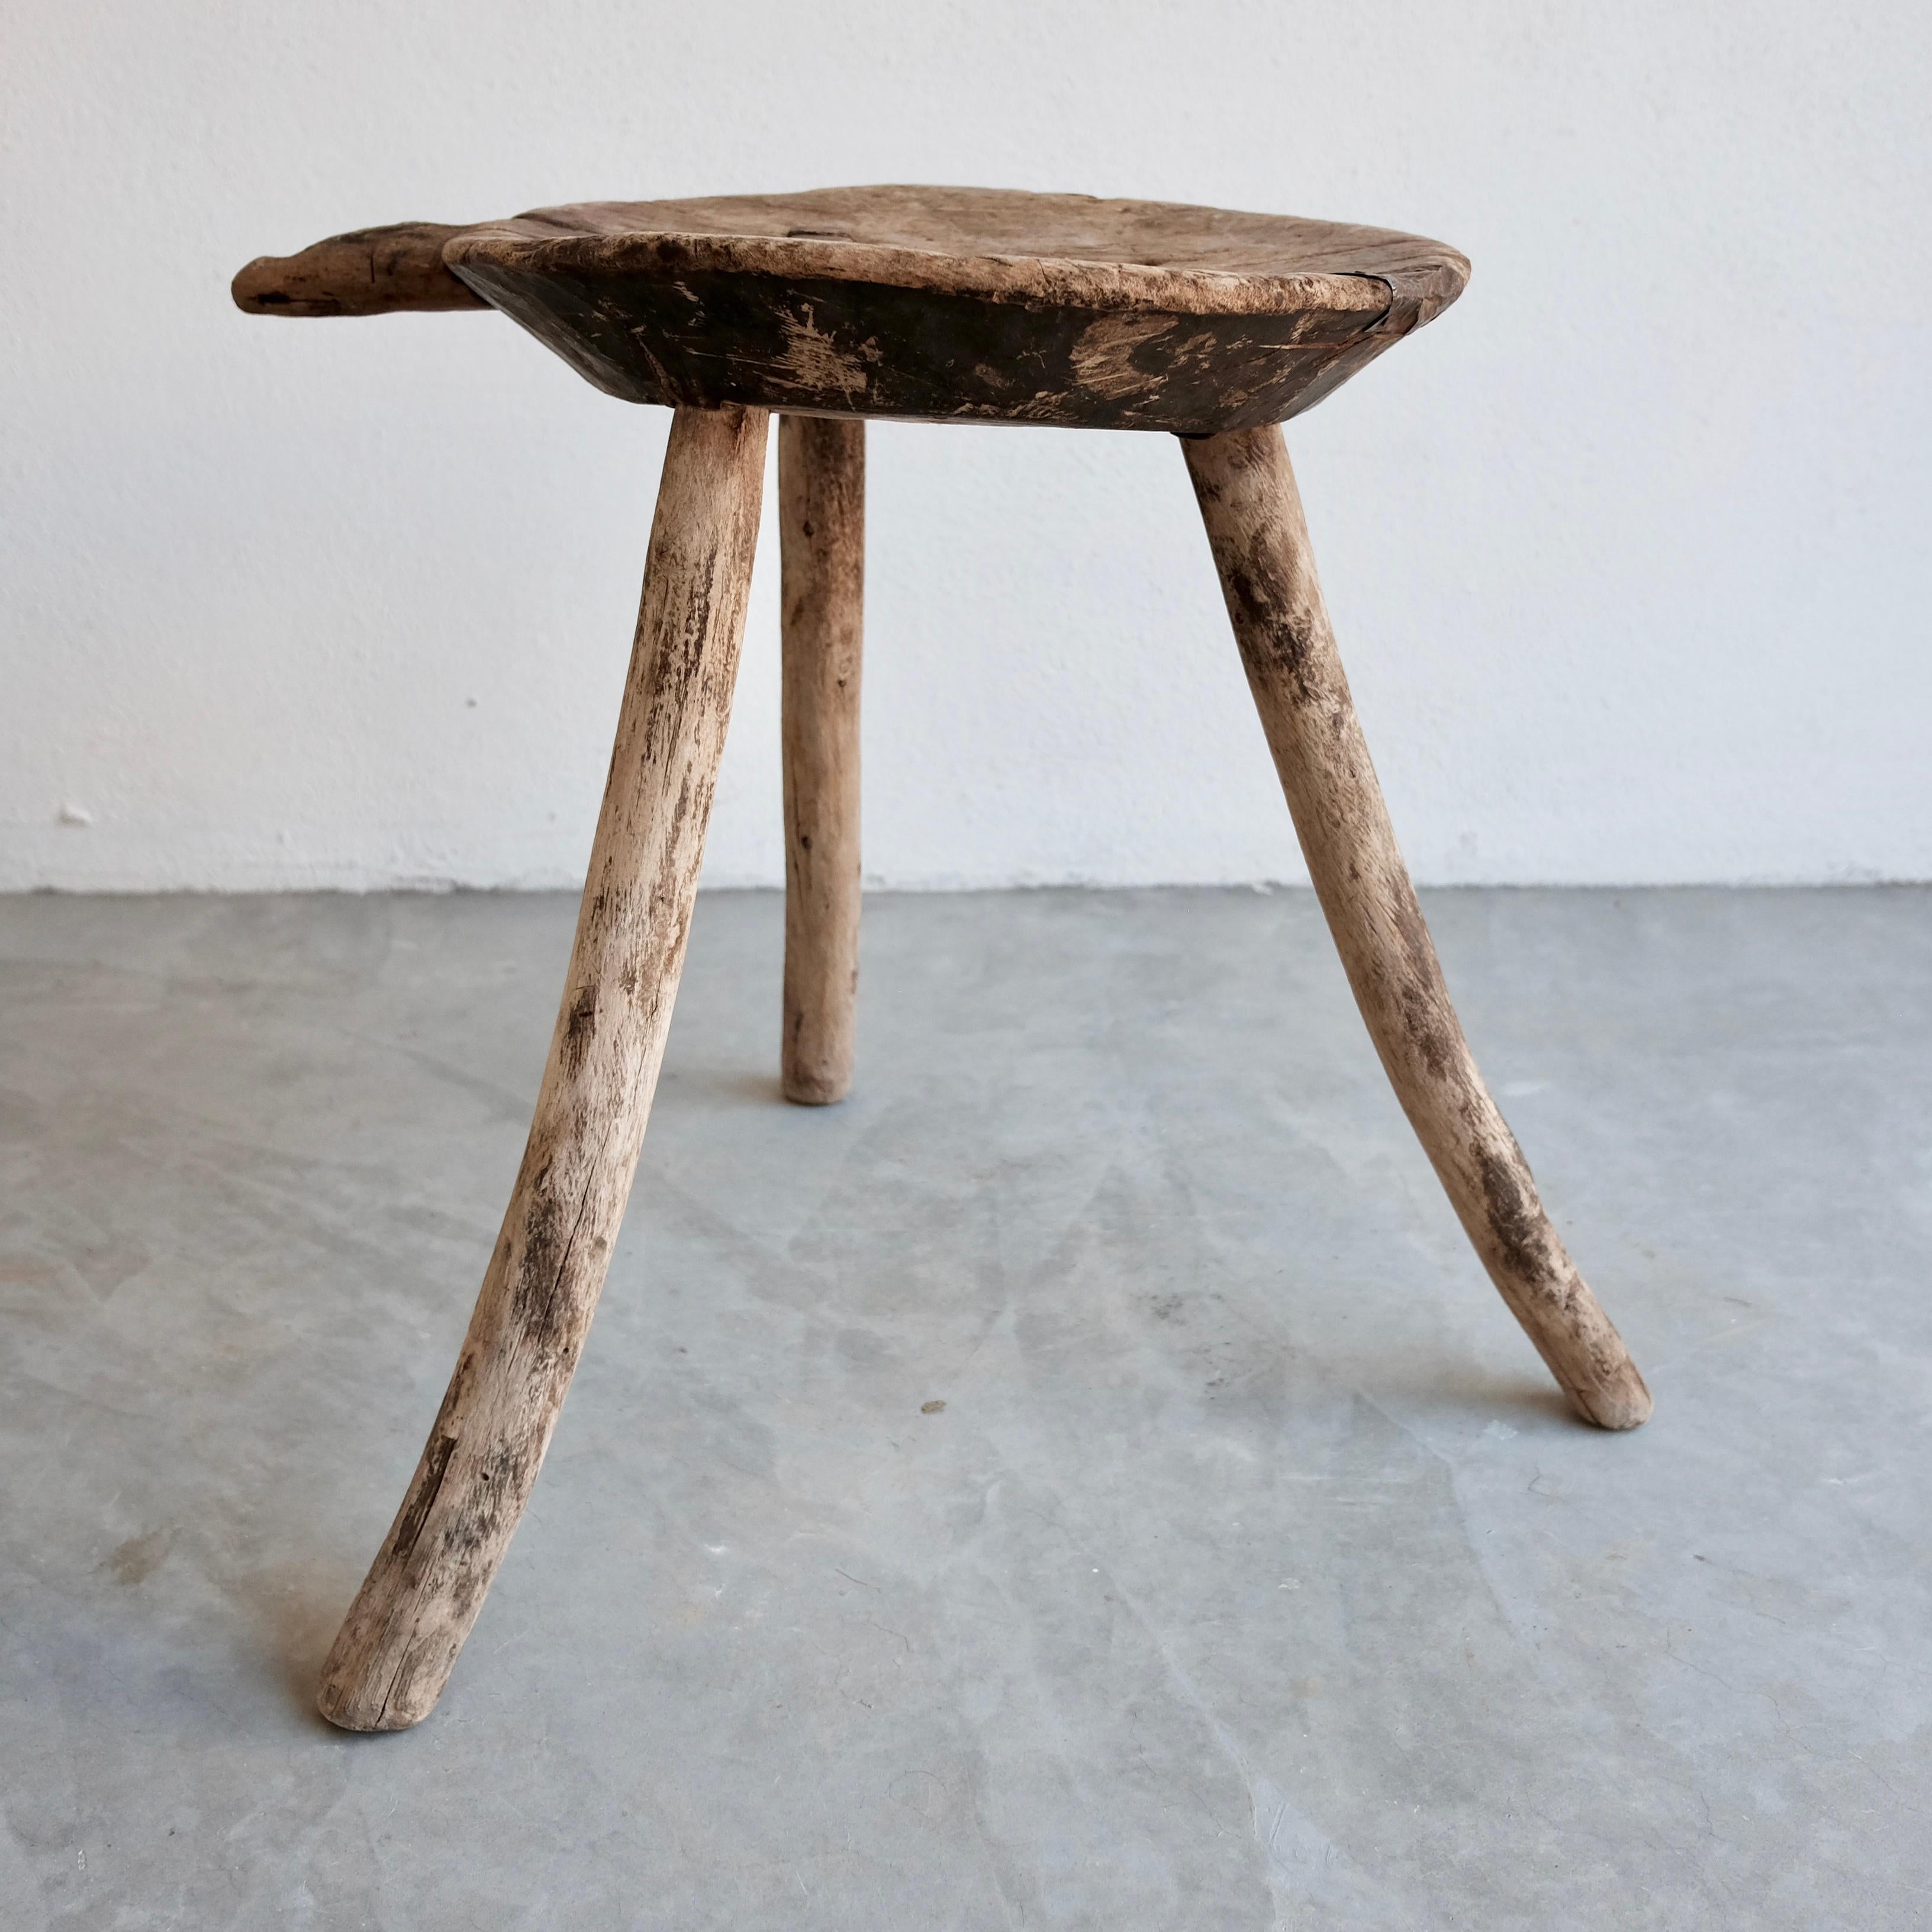 Mesquite Stool with Handle from Mexico 2